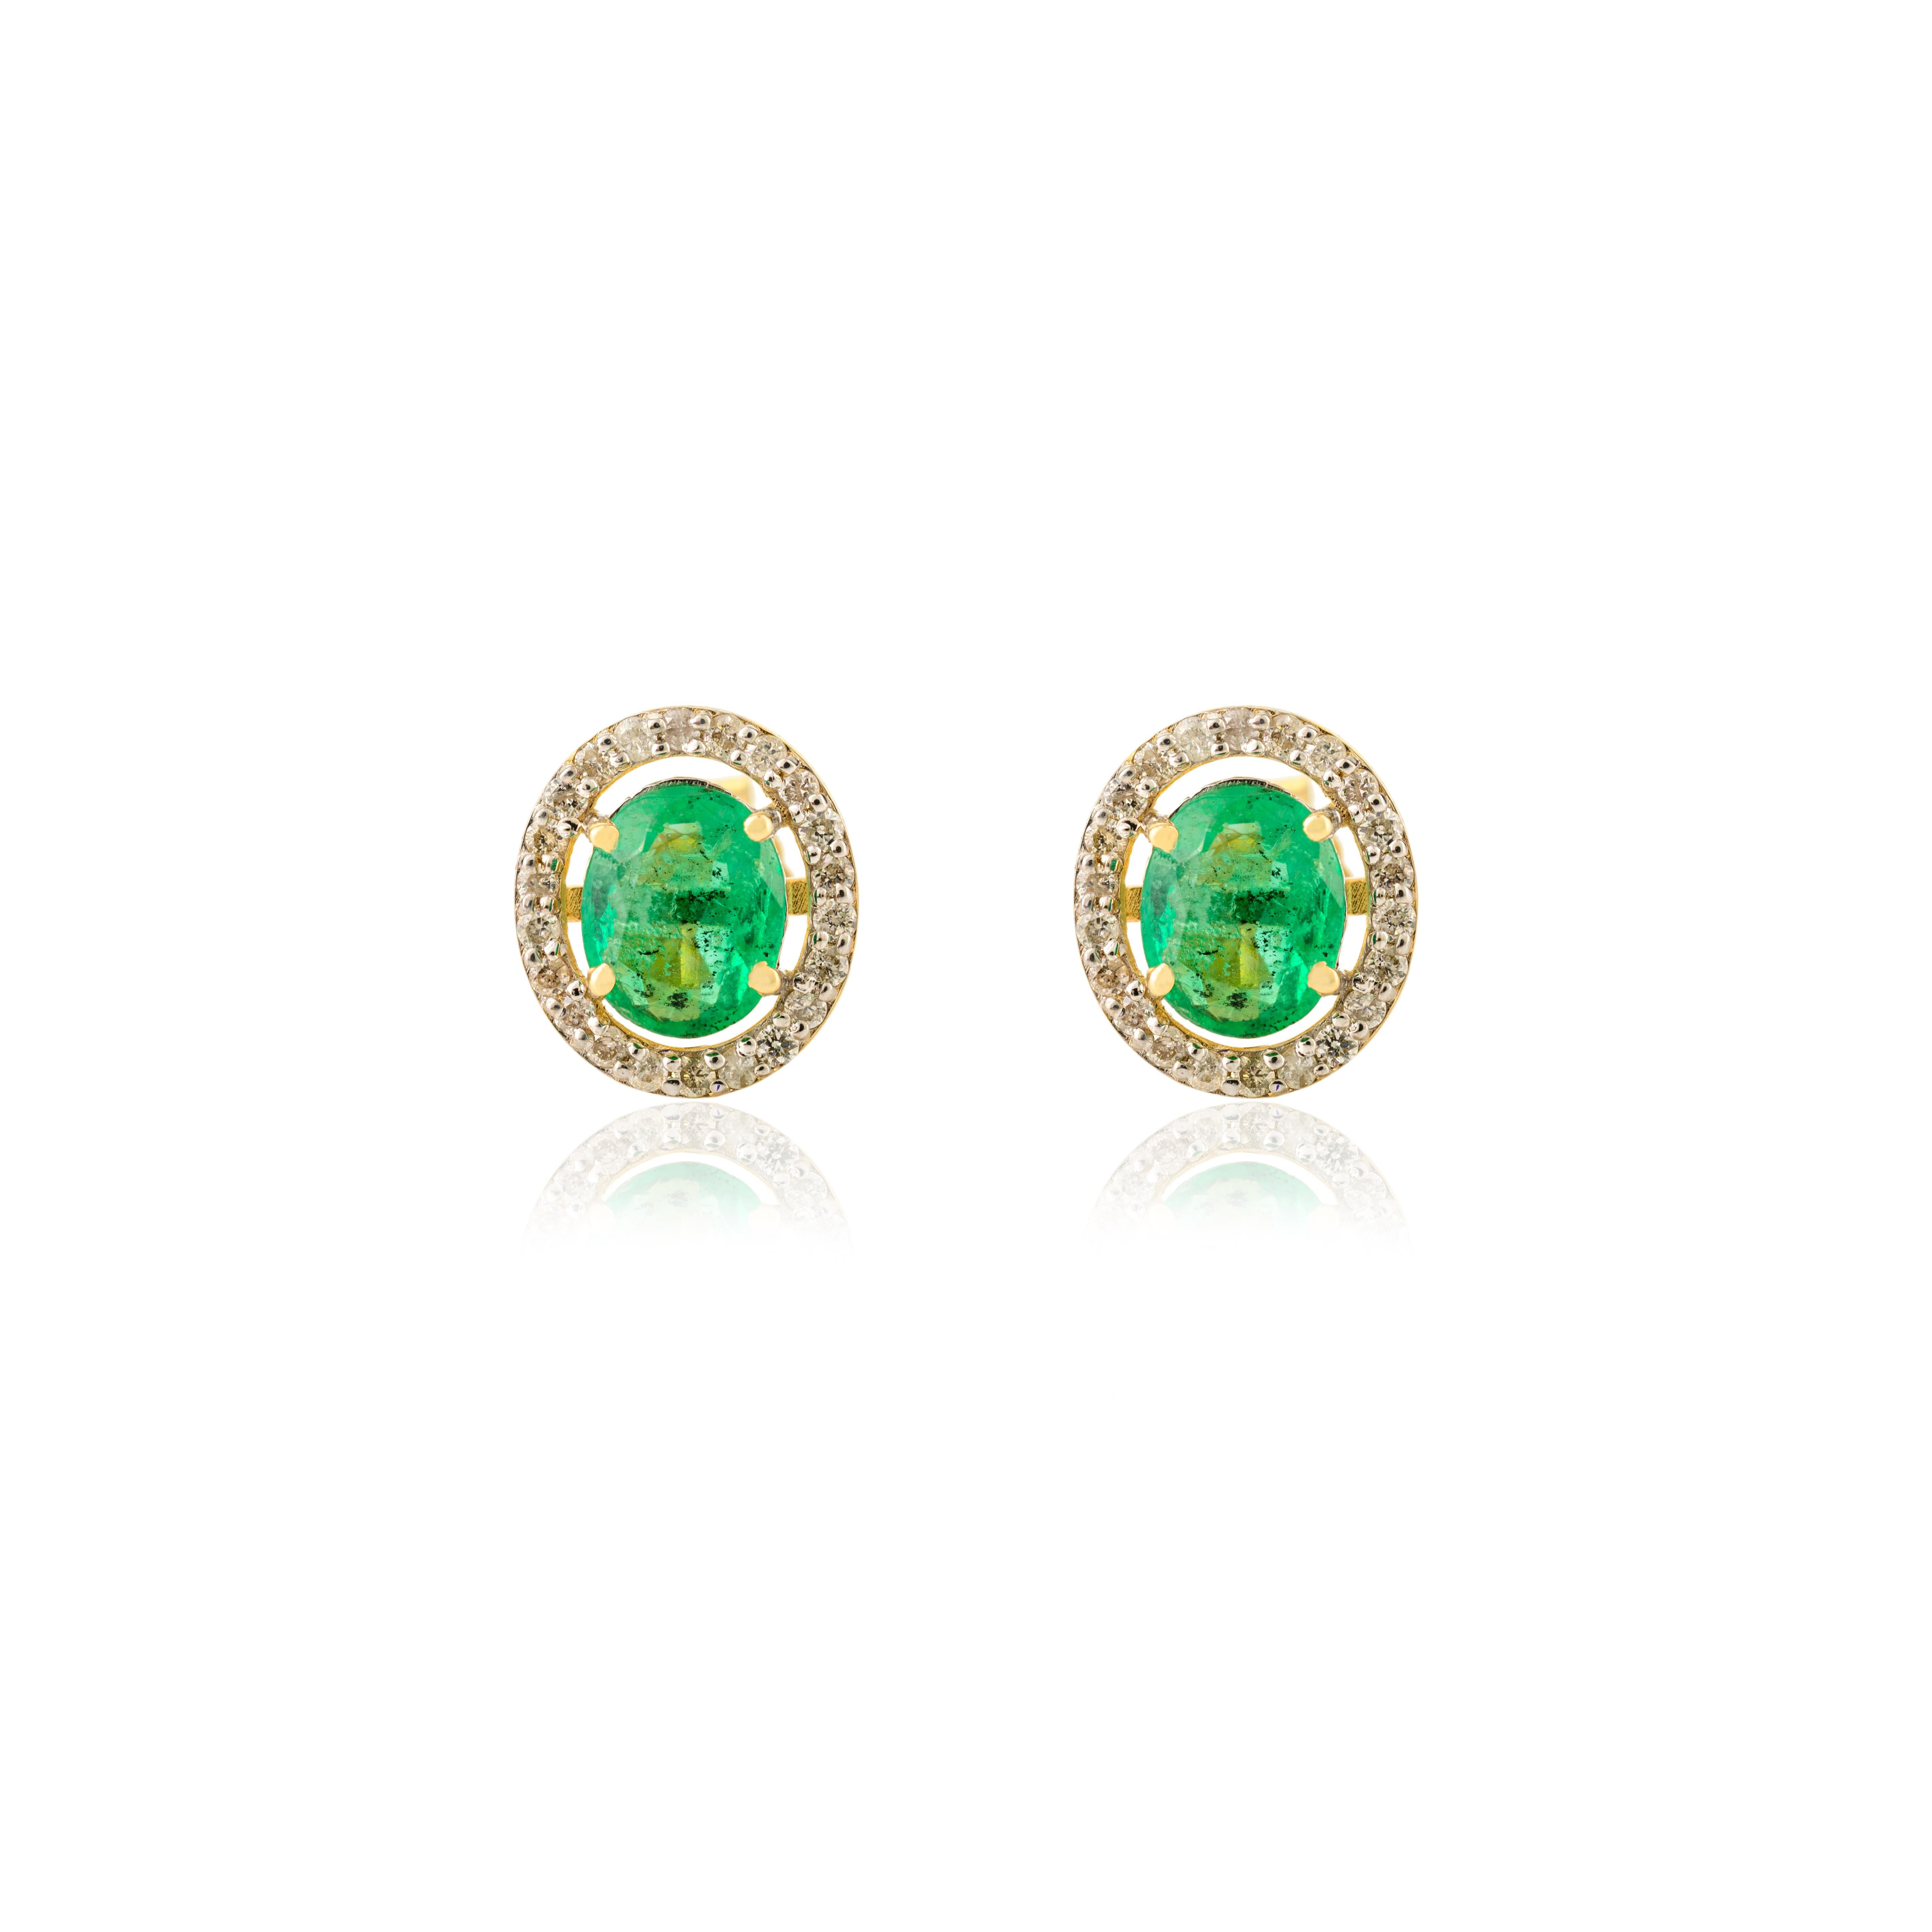 Modern 14k Yellow Gold Genuine Emerald Diamond Halo Stud Earrings Gift for Her For Sale